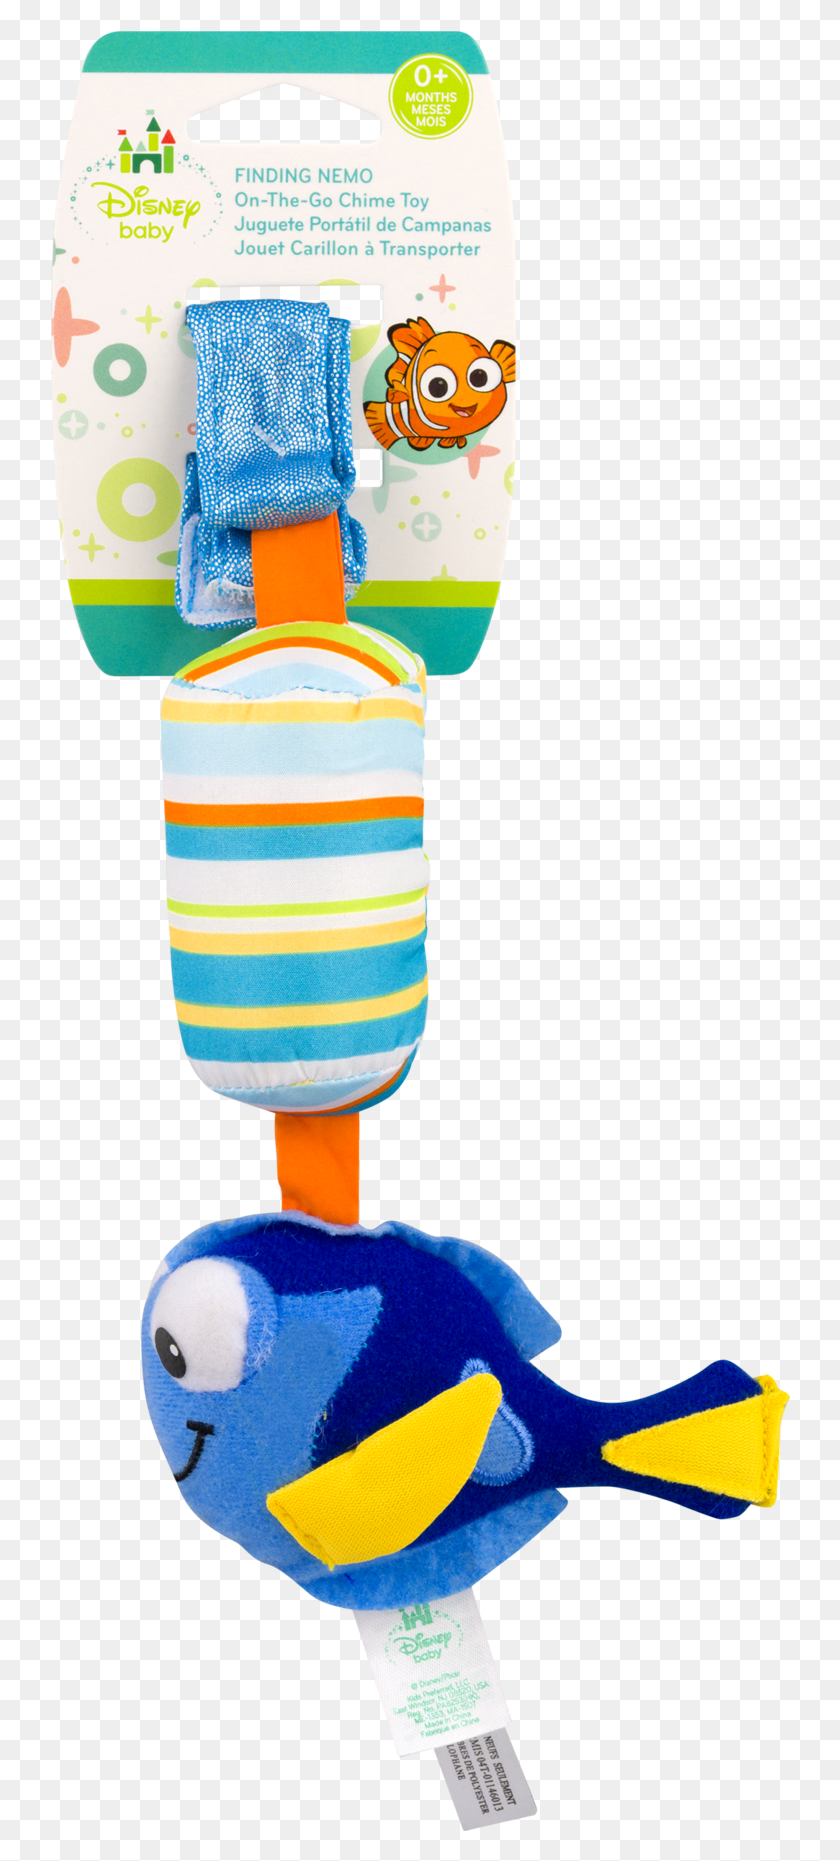 740x1801 Disney Baby Finding Nemo On The Go Chime Toy 0 Months Stuffed Toy, Clothing, Apparel, Beverage HD PNG Download